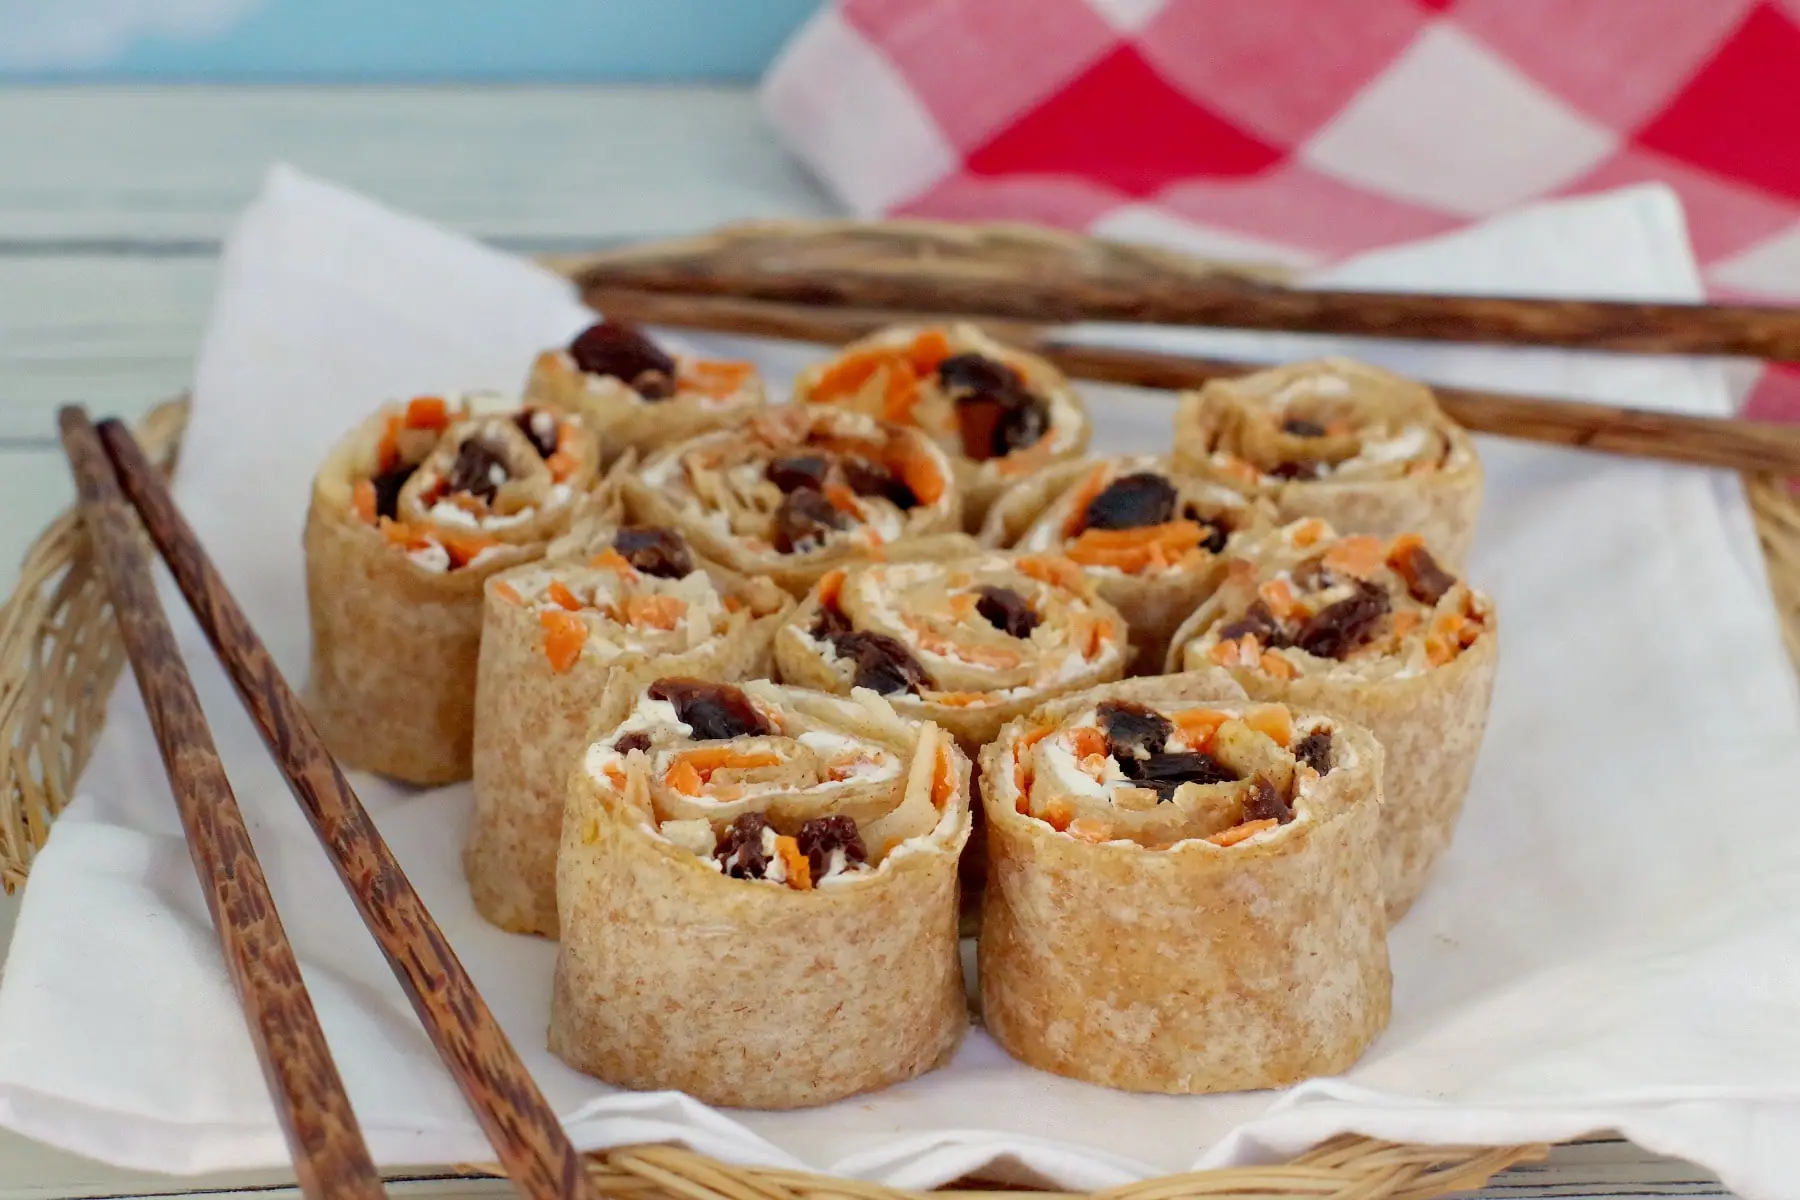 raisin sushi set up for a picnic with chopsticks